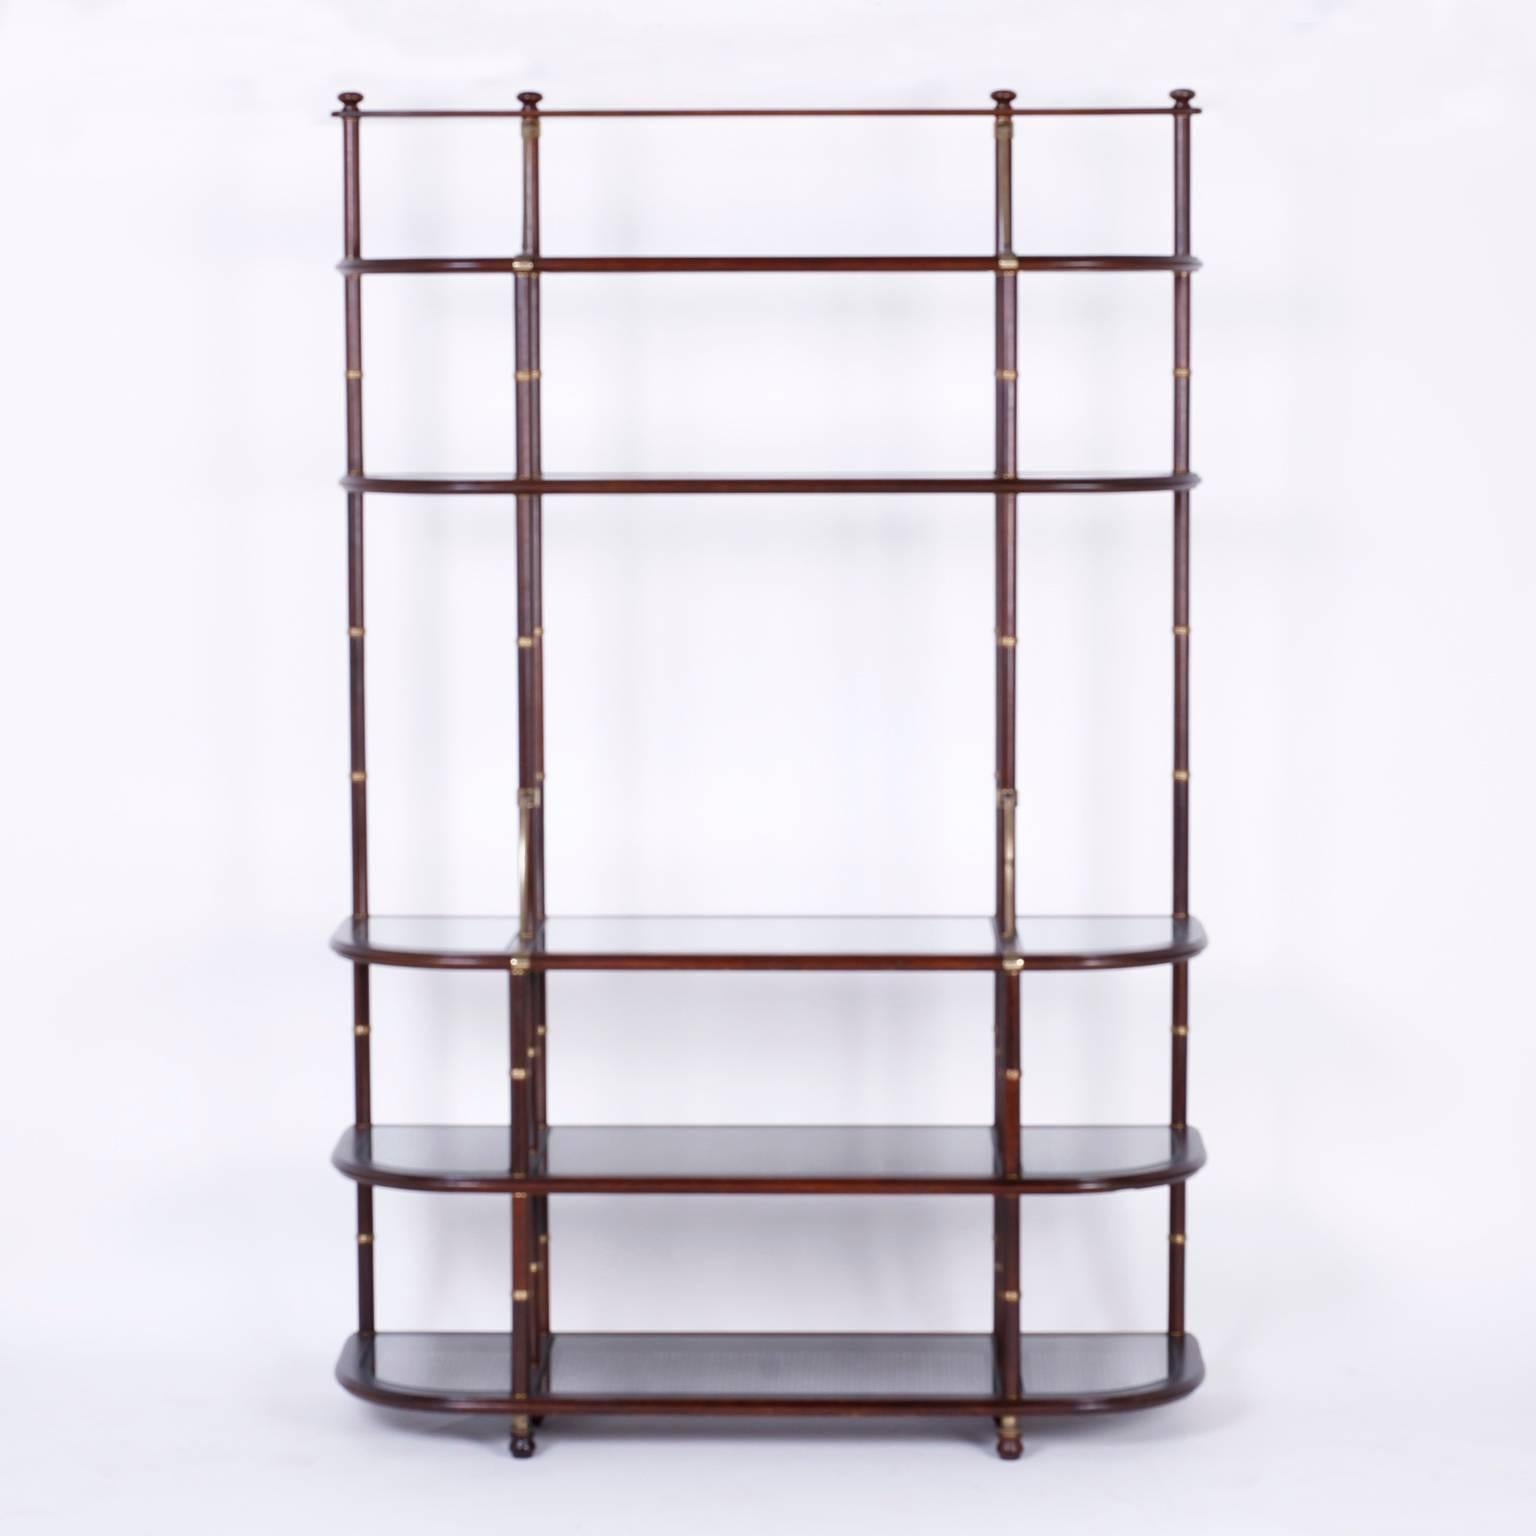 Tall, sophisticated mahogany étagère or shelf with an interesting mixture of influences and materials. The brass cuffs suggest an elegant Regency faux bamboo style while the tone of the mahogany, the brass supports and caned lower three shelves have